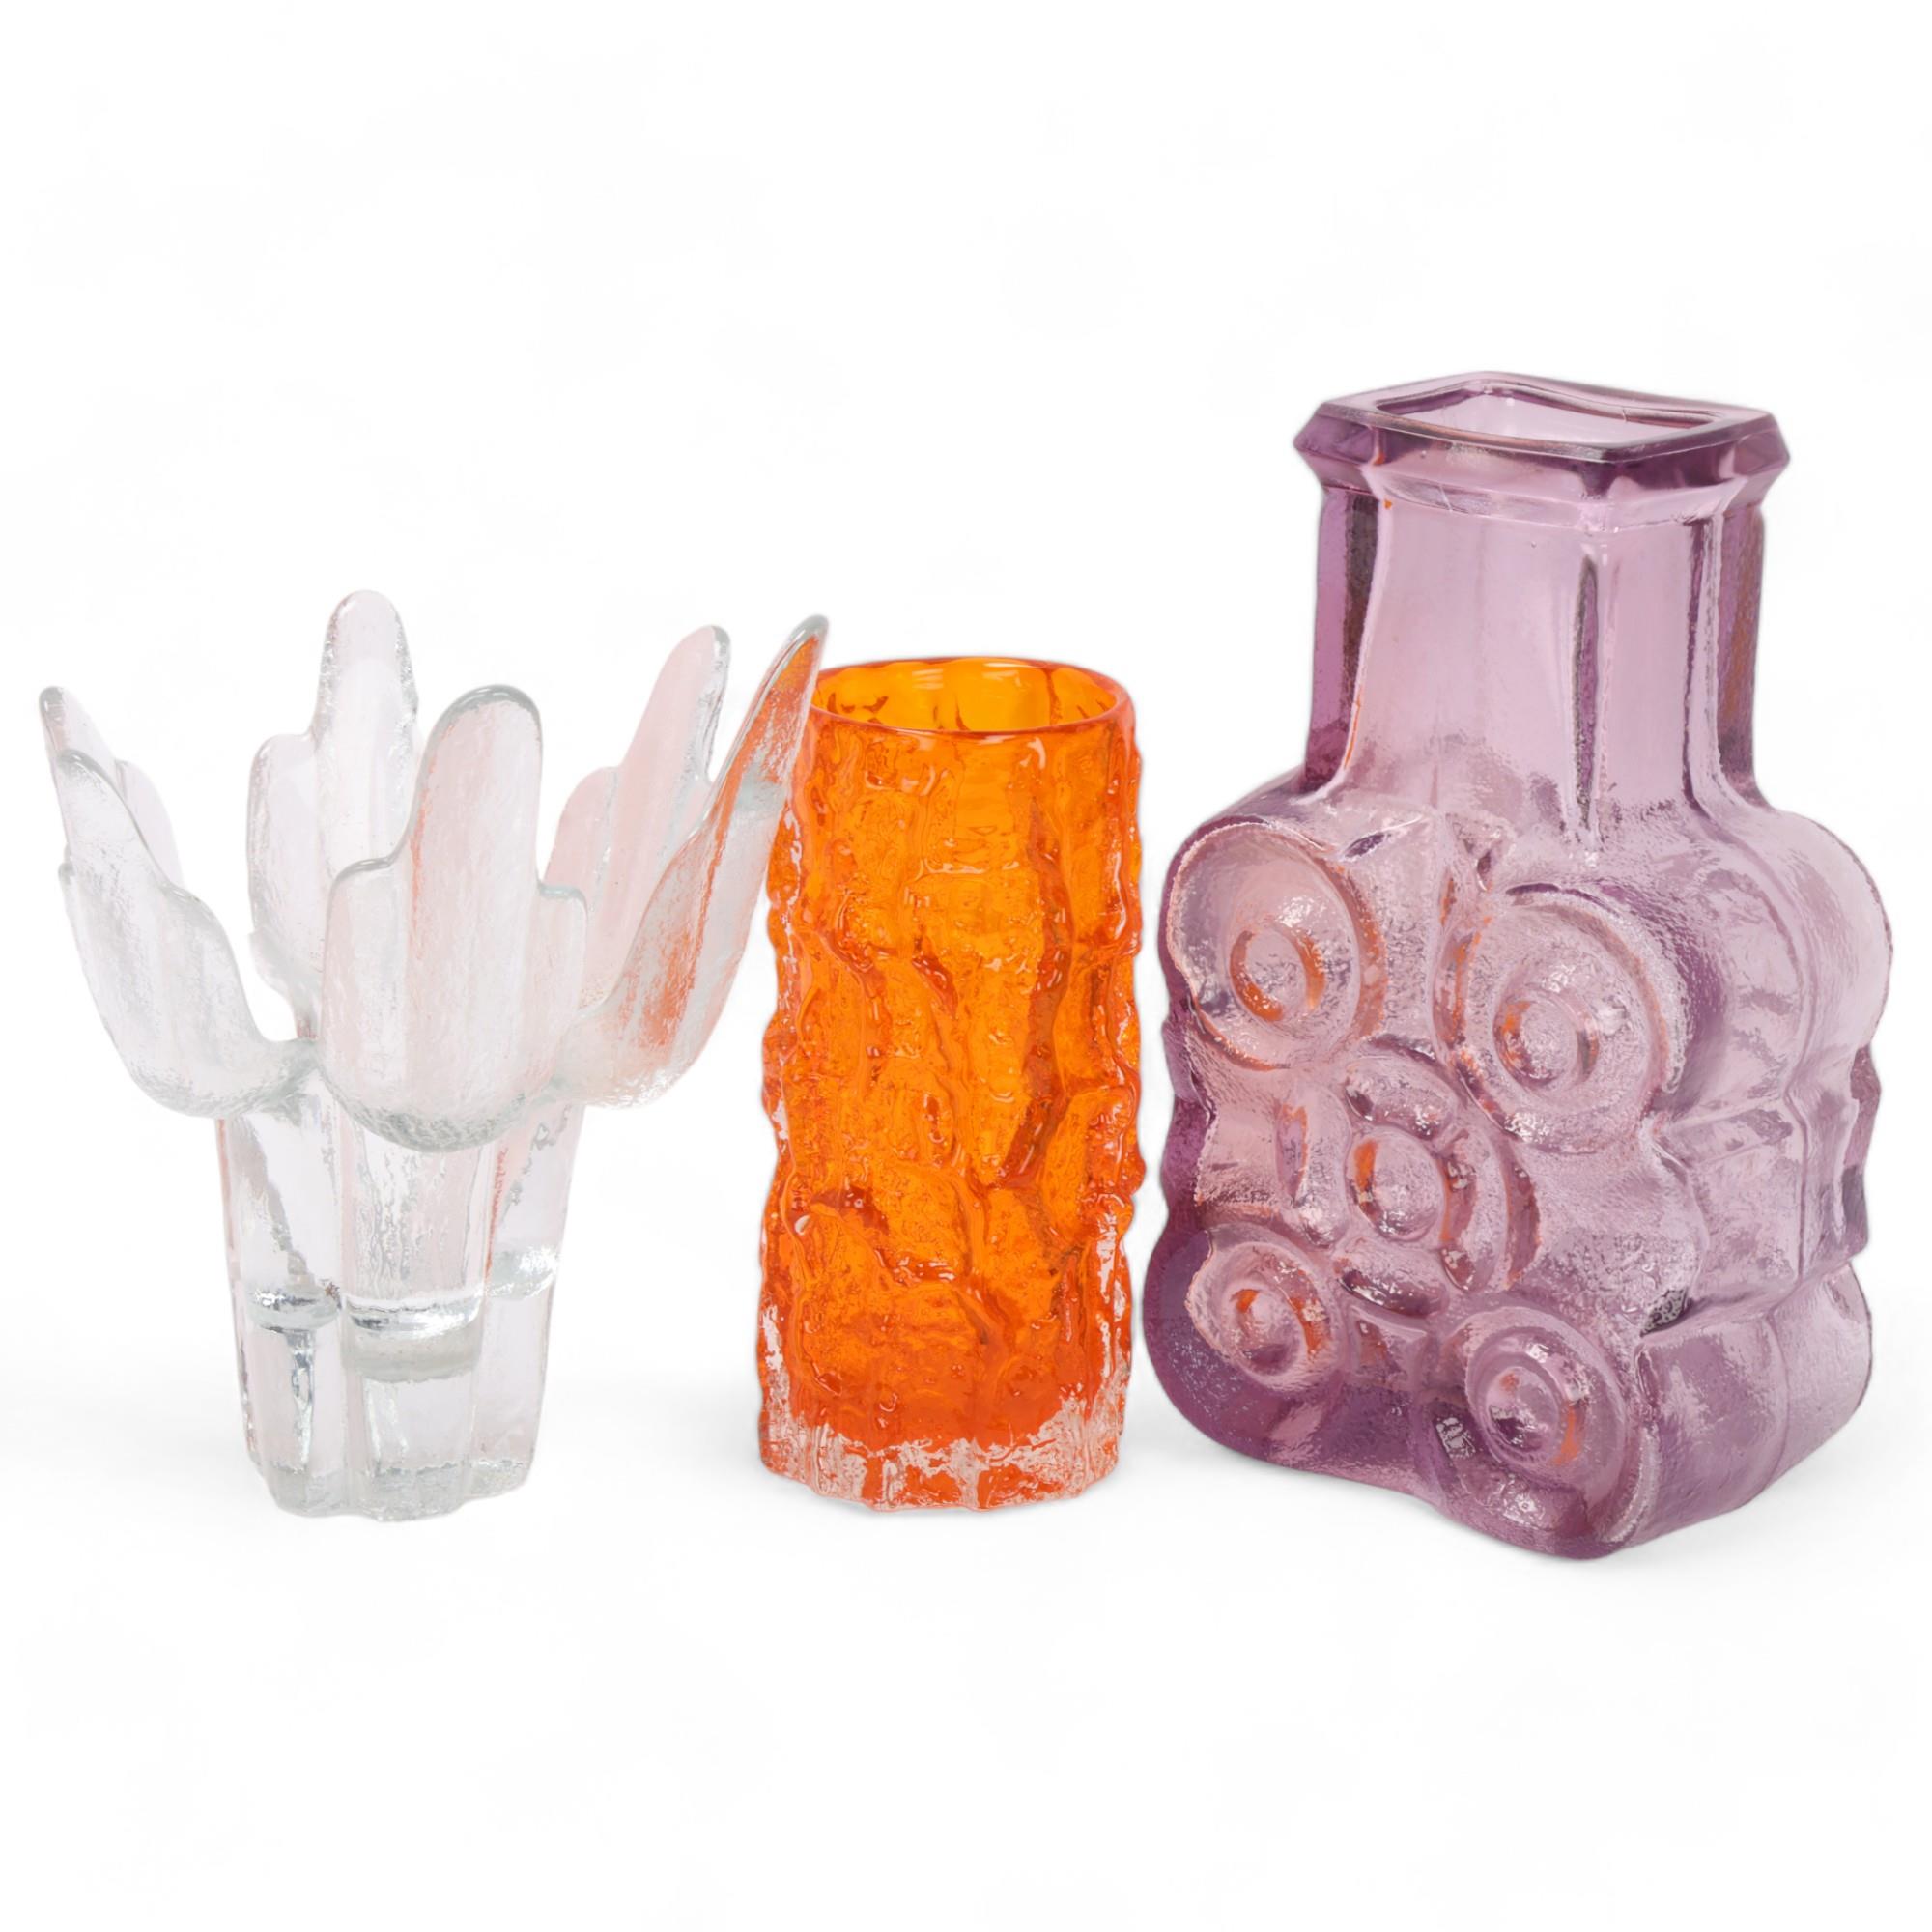 HEINER DUSTERHAUS for Walther Glass, Germany, a 1972 designed amethyst glass vase together with a